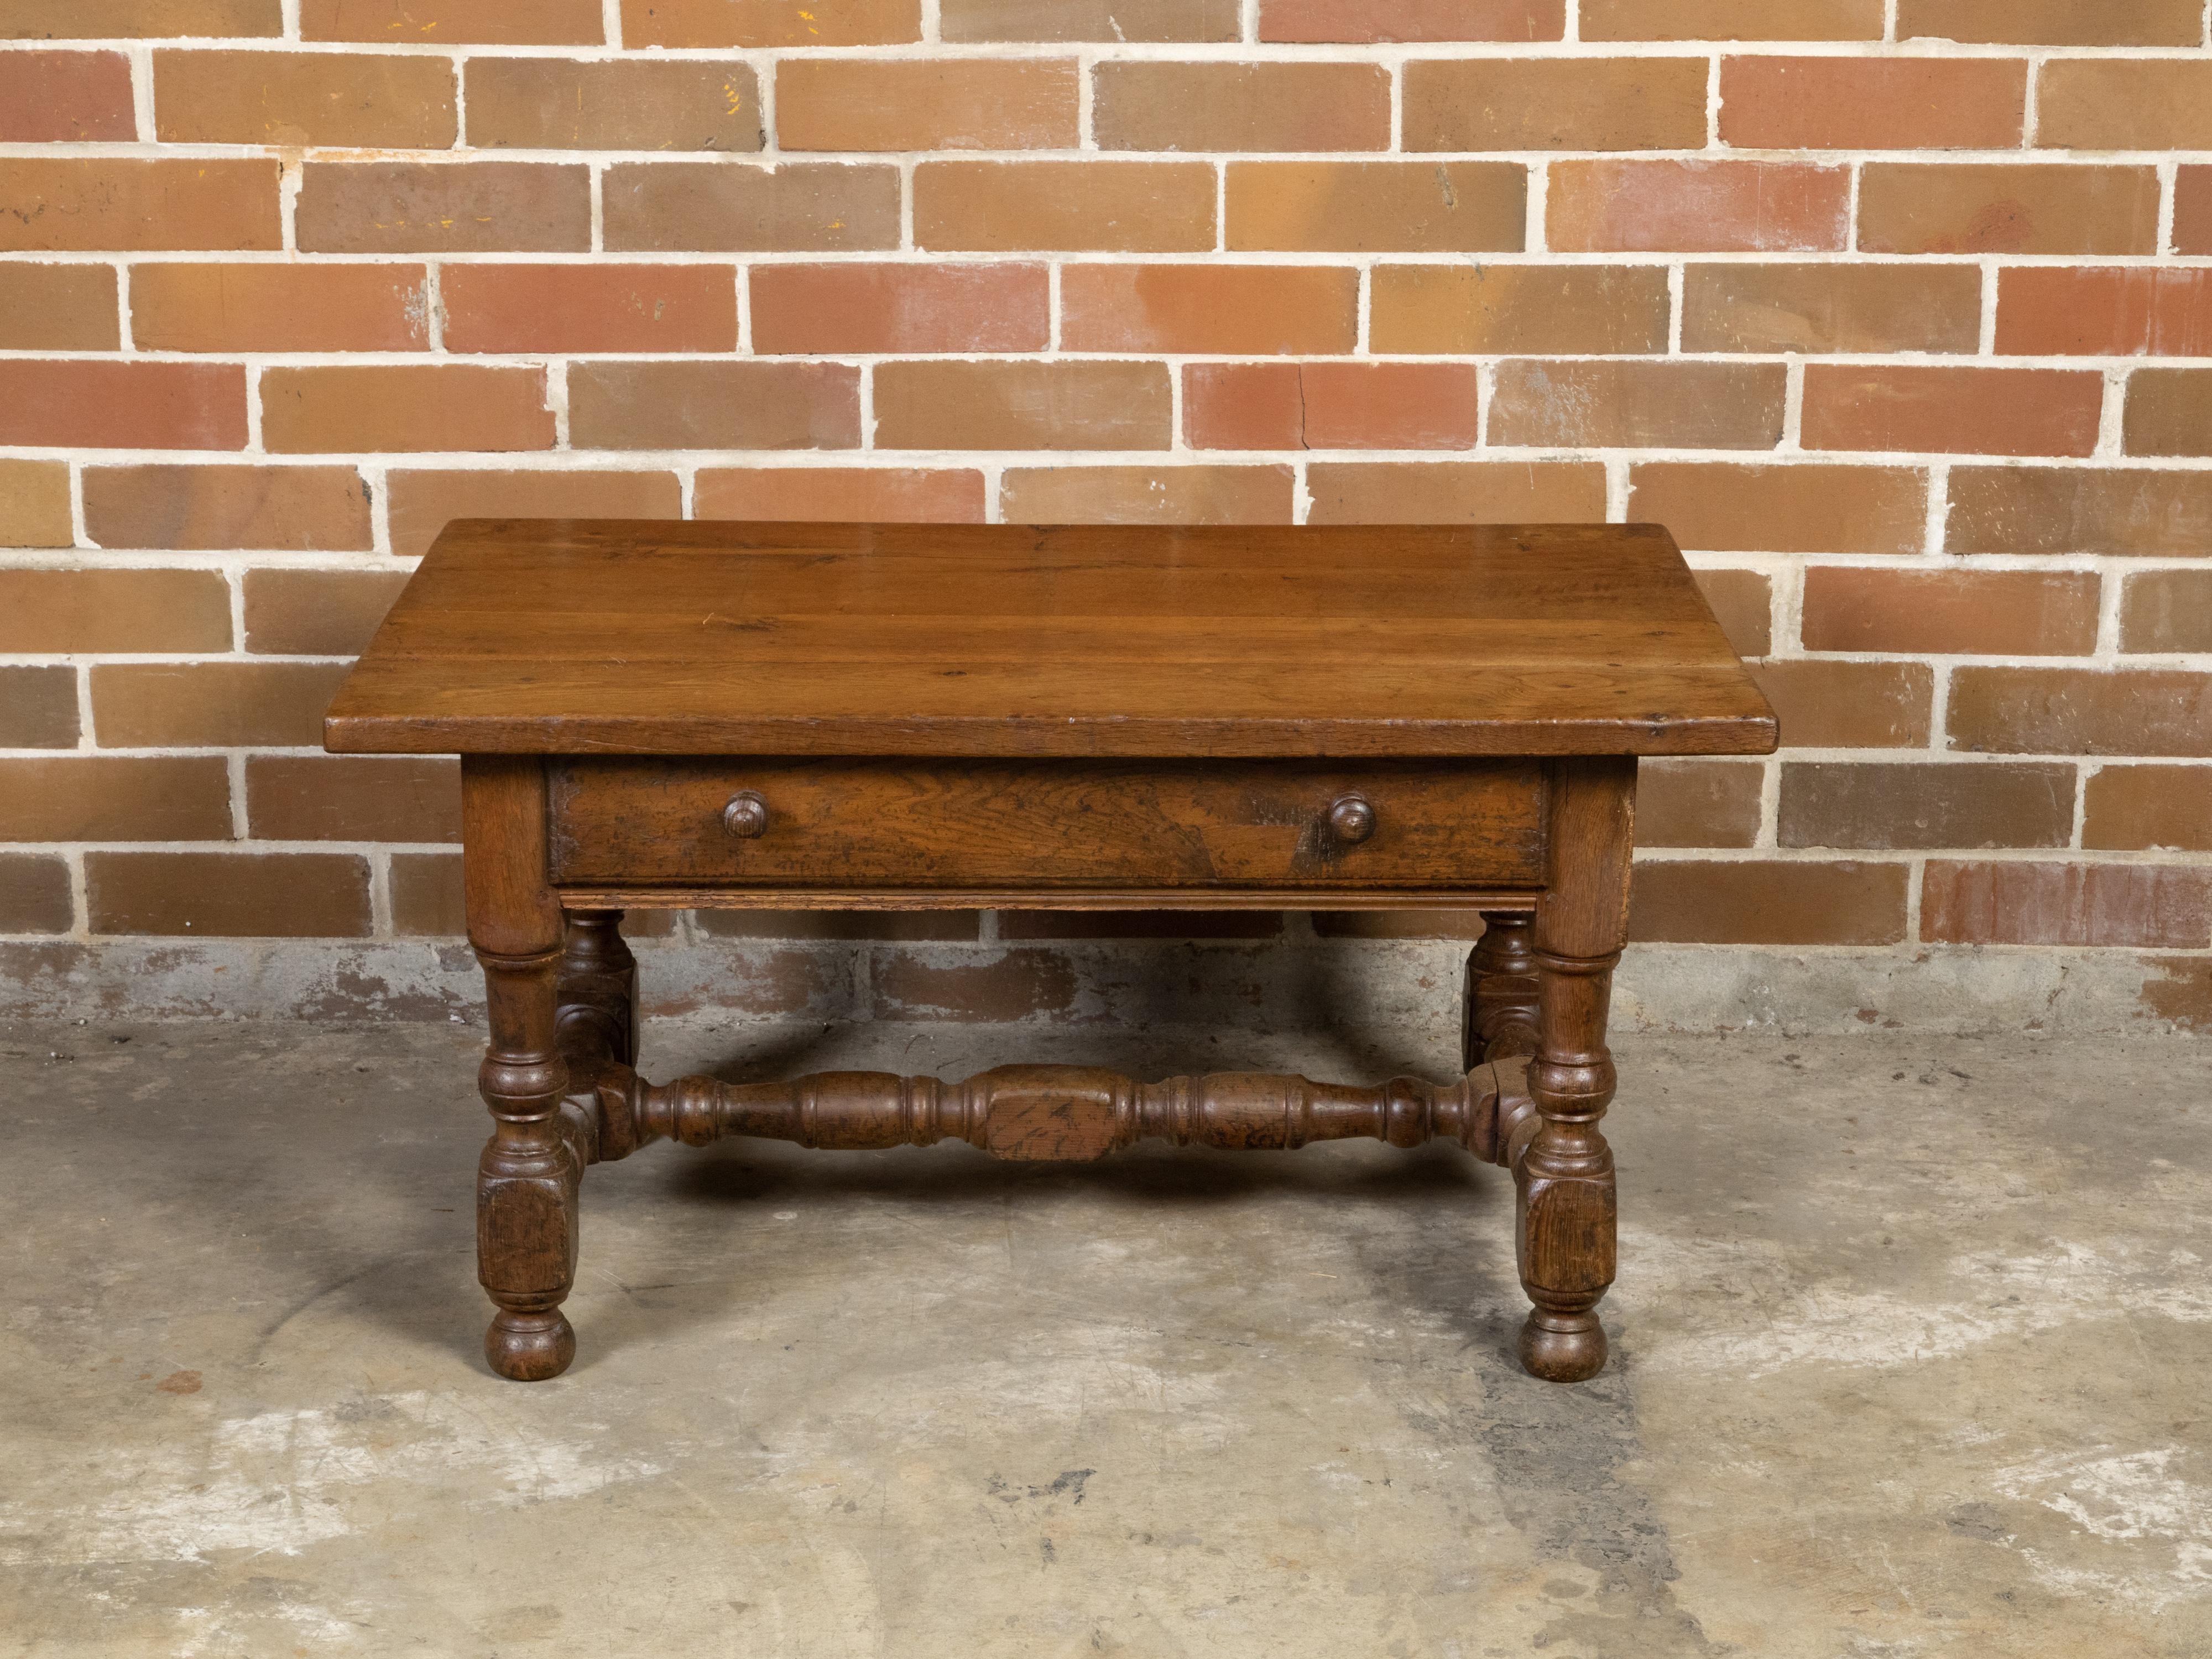 An English oak coffee table from the 19th century with single drawer, wooden pulls and turned base. Created in England during the 19th century, this oak coffee table features a rectangular planked top sitting above a single drawer, grooved for the